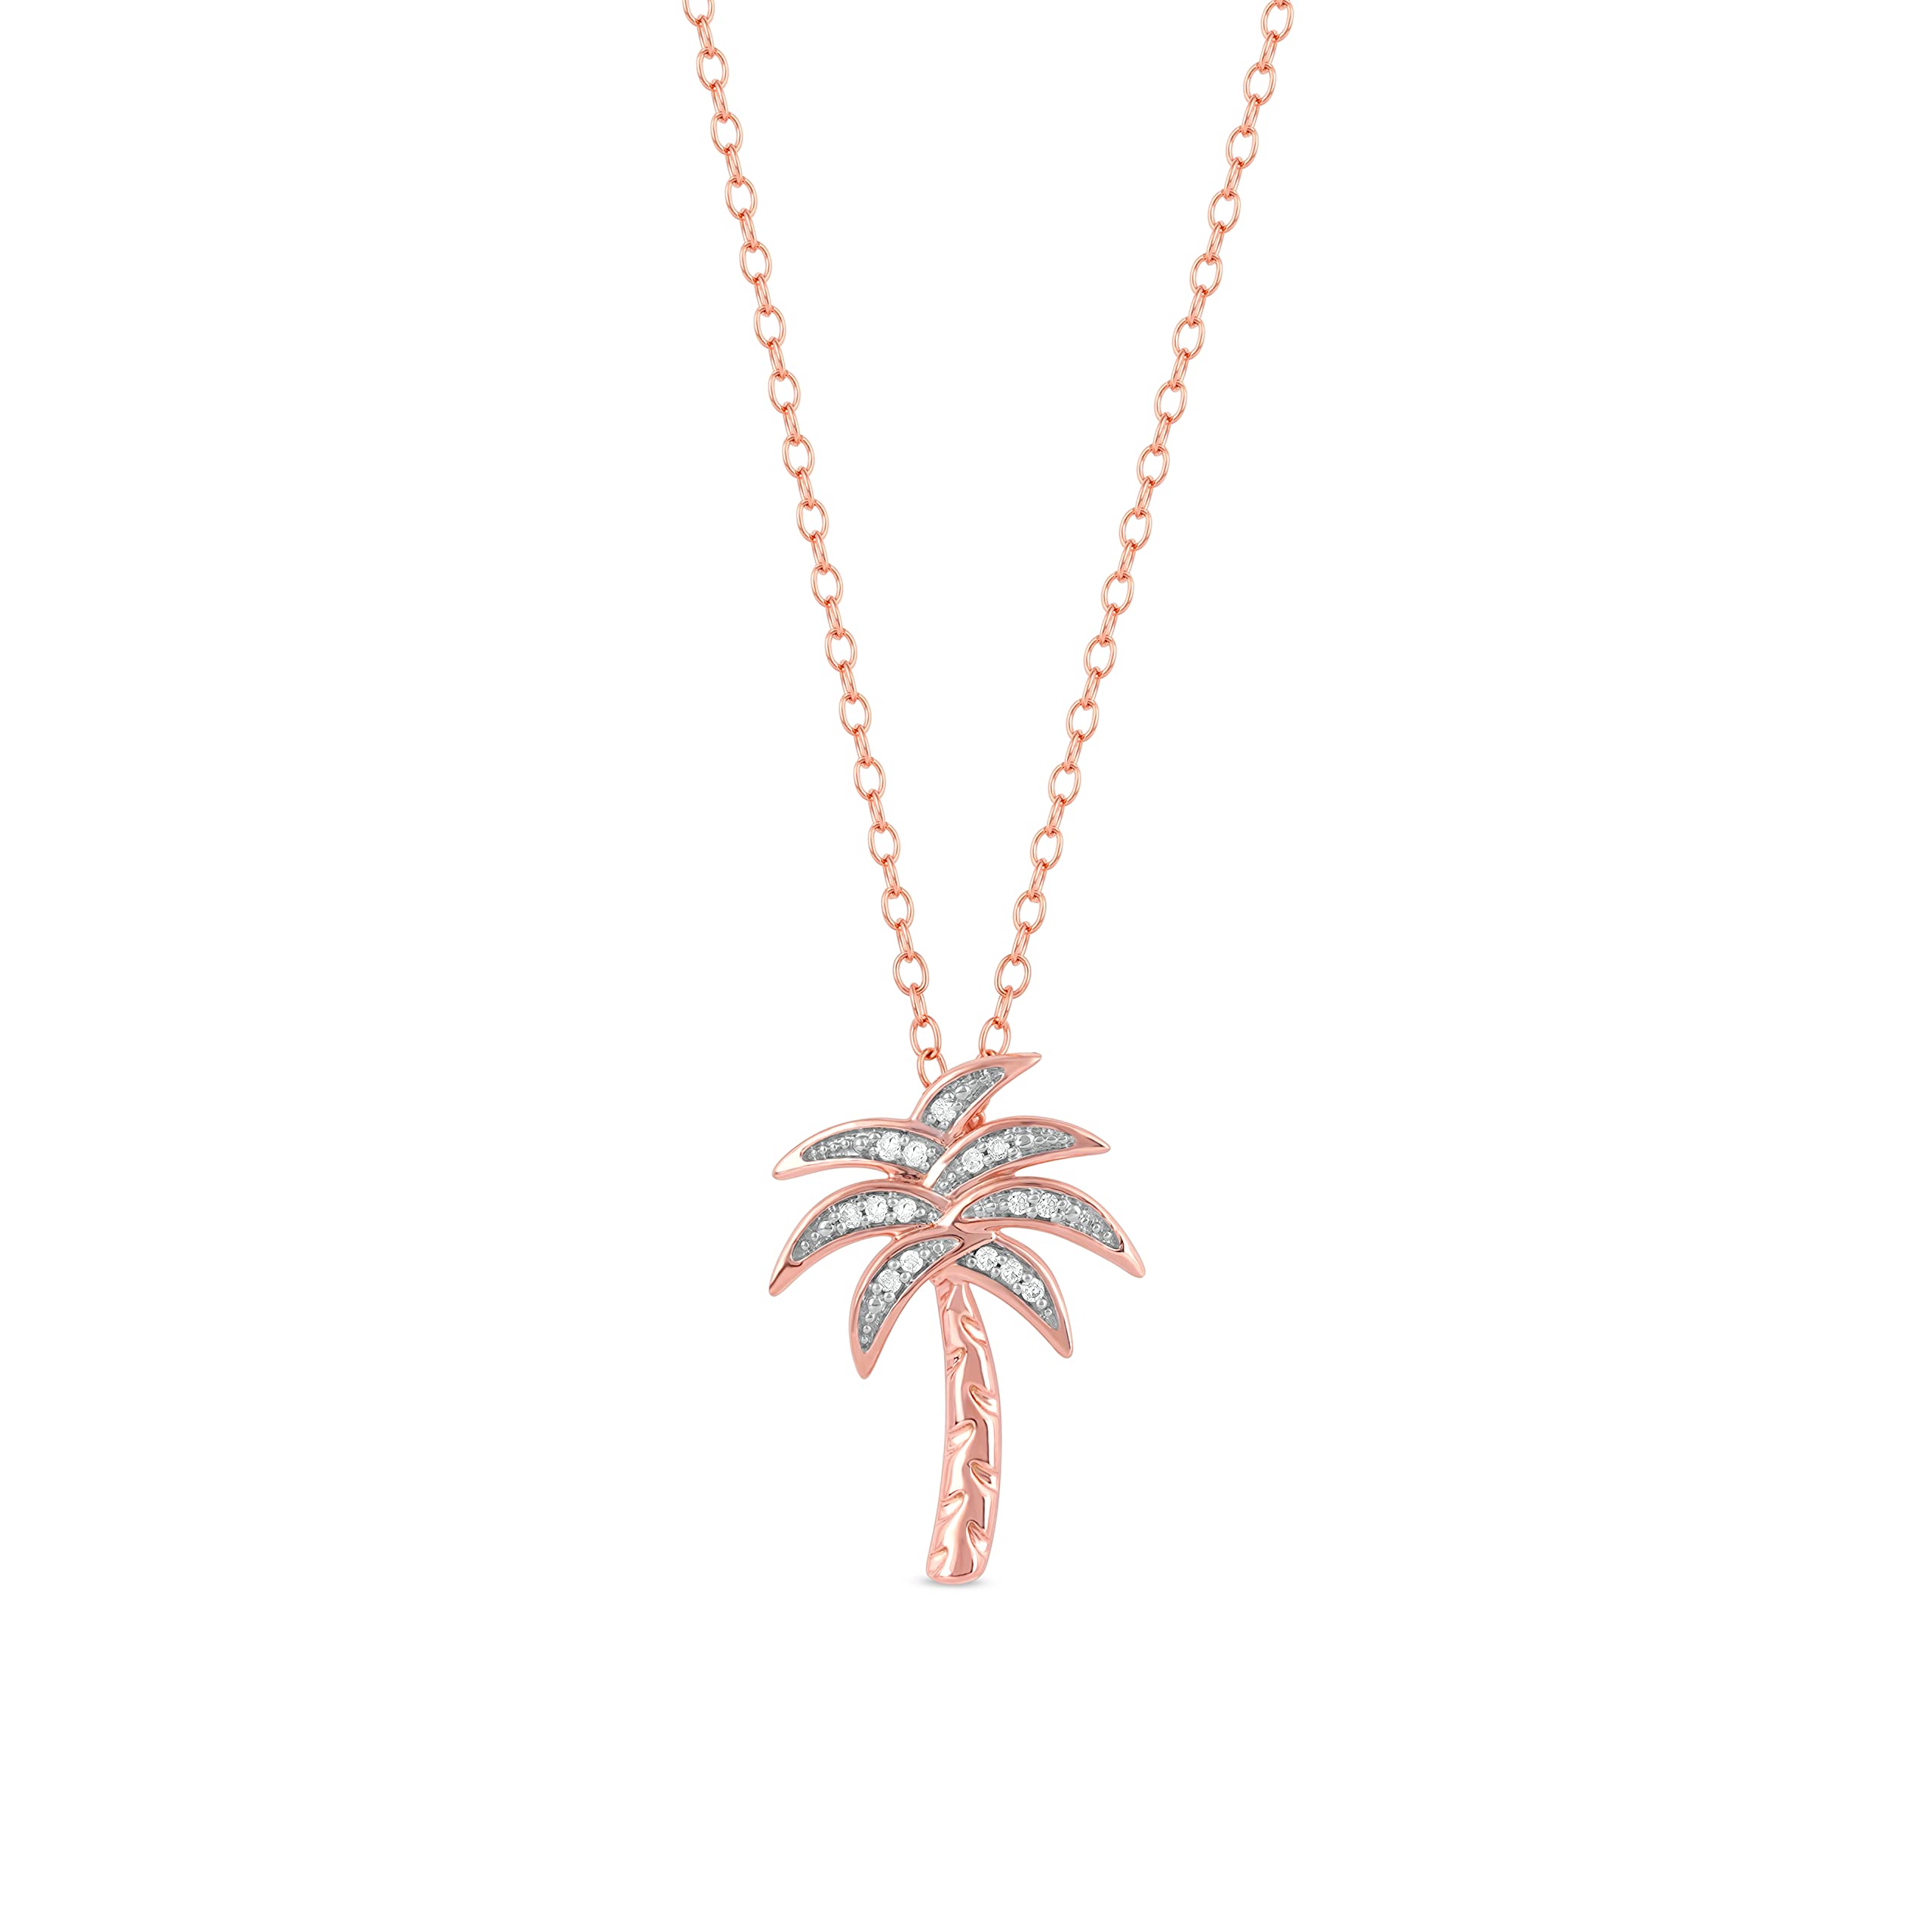 Sterling Silver 1/20ct TDW Real Diamond Palm Tree beach Jewelry Pendant Necklace for Women Girls A Love Gift by DZON(I-J,I2)